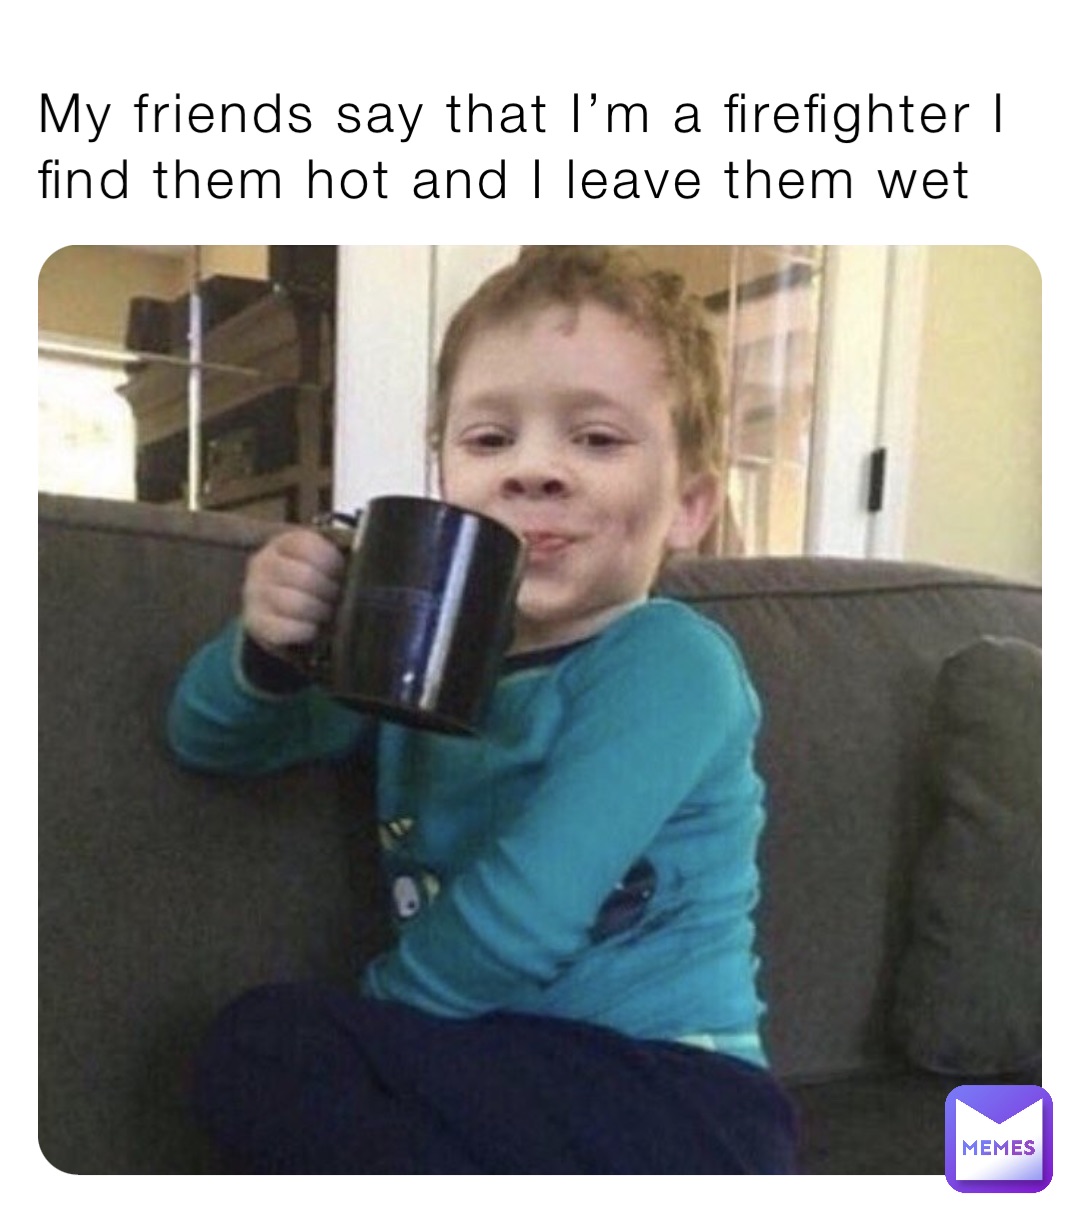 My friends say that I’m a firefighter I find them hot and I leave them wet